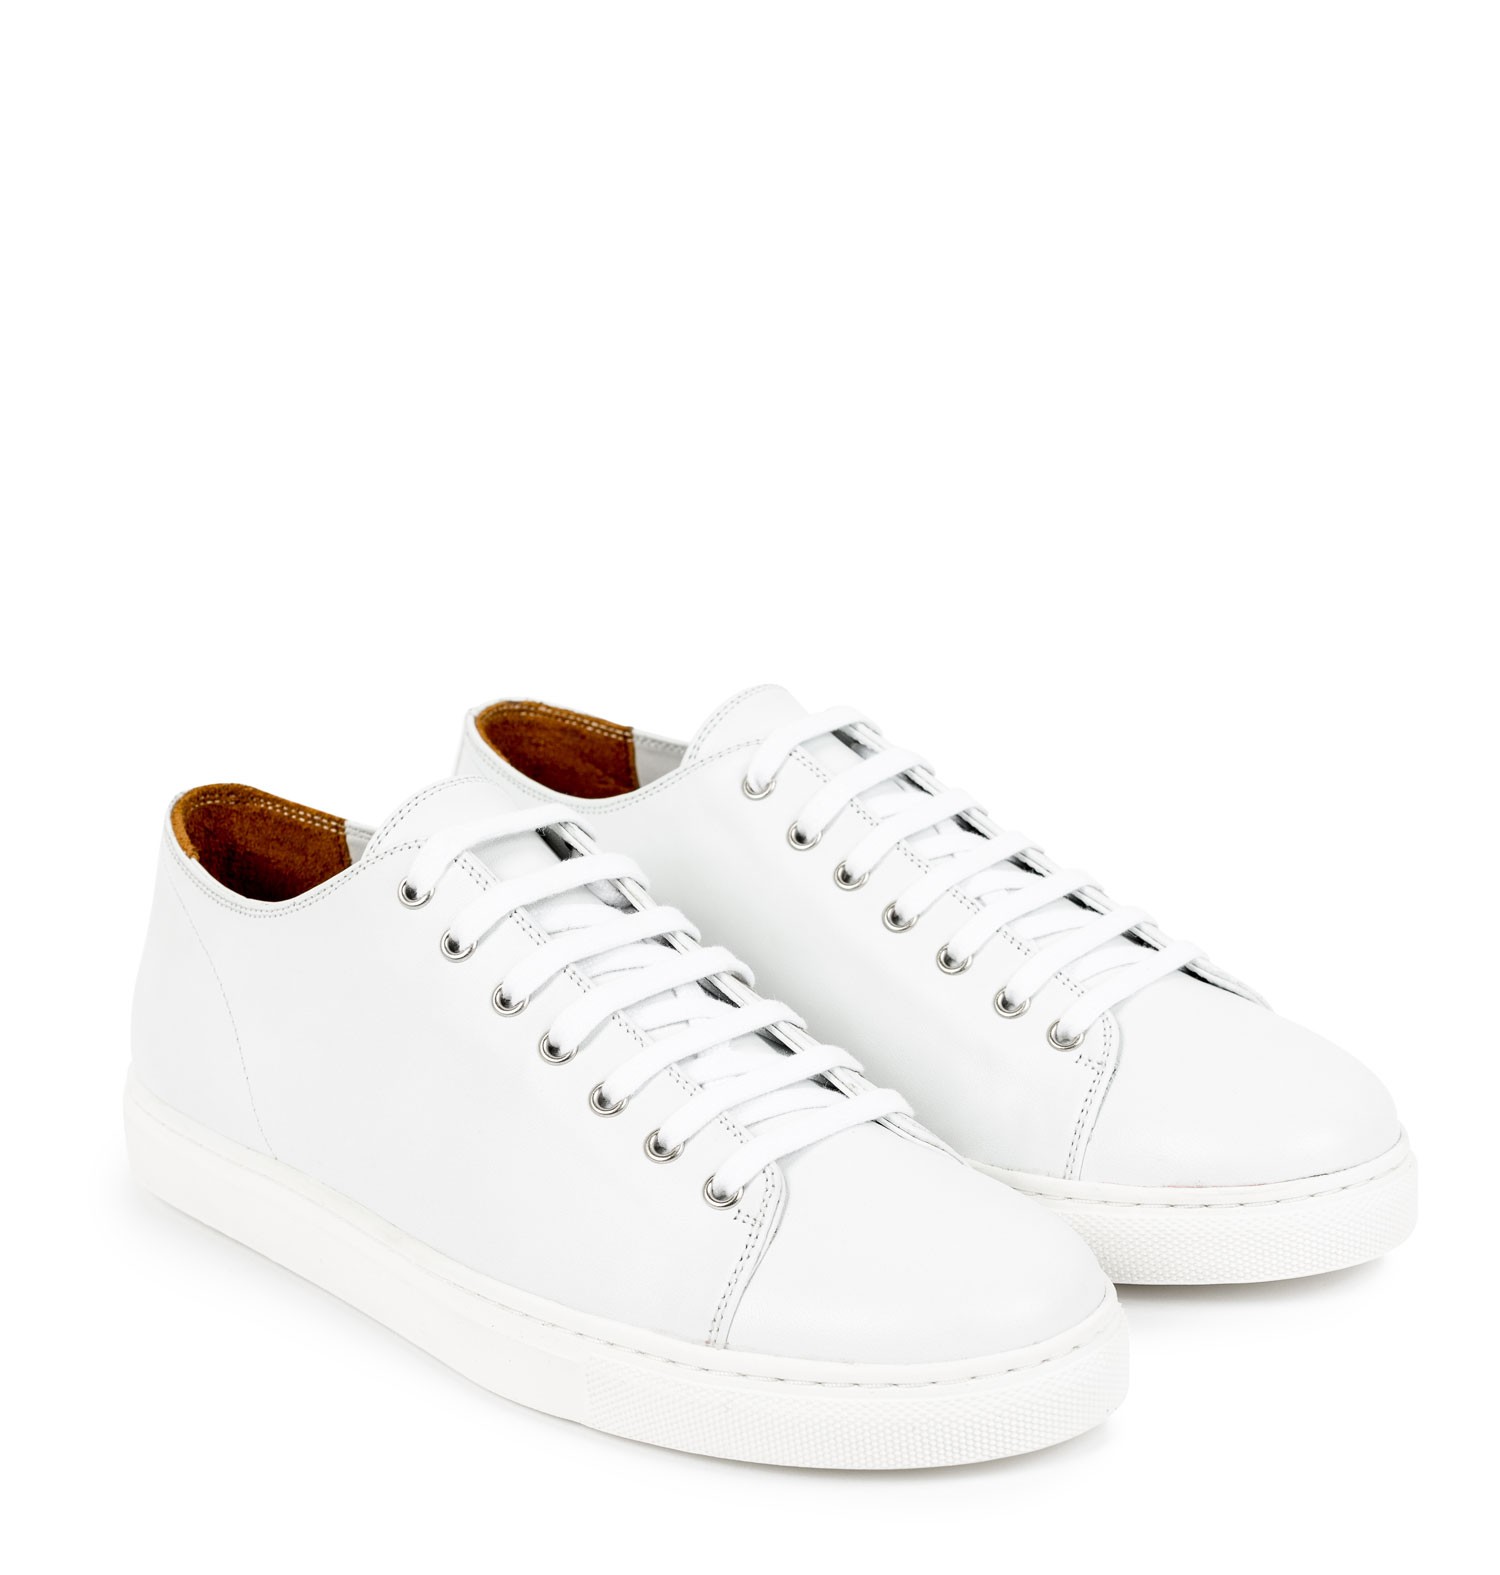 leather tennis shoes in white TCNAFMQ